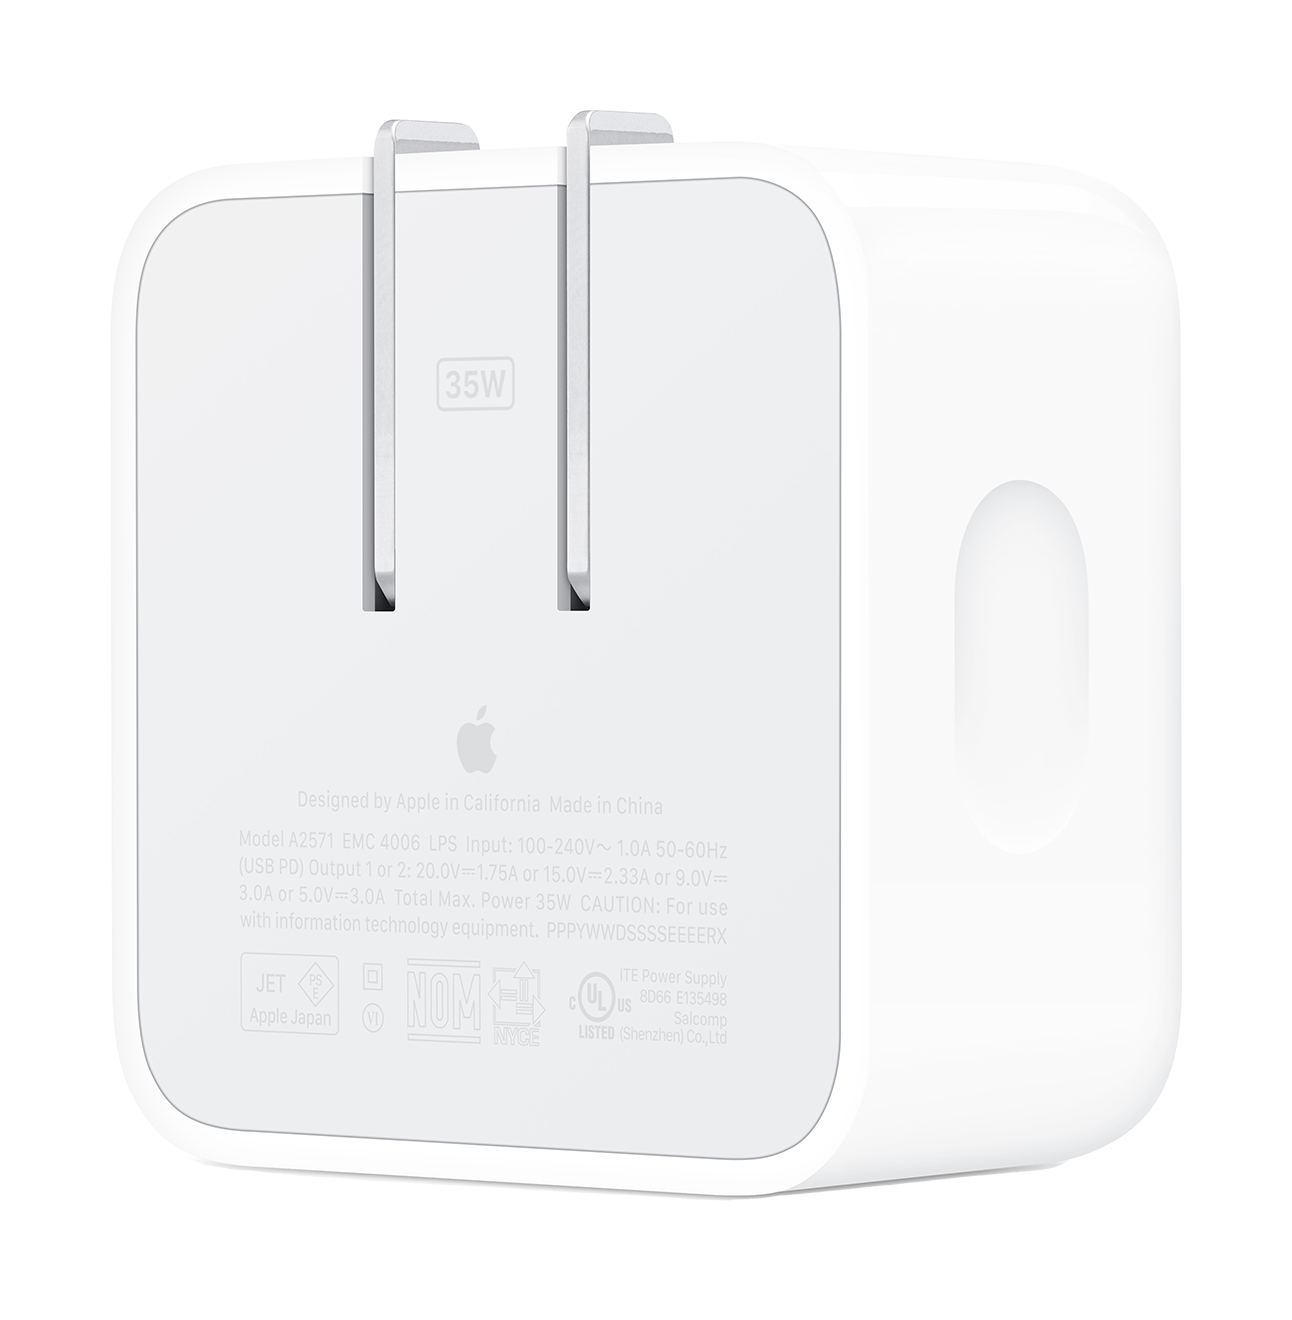 35W Dual USB C Port Compact Power Adapter